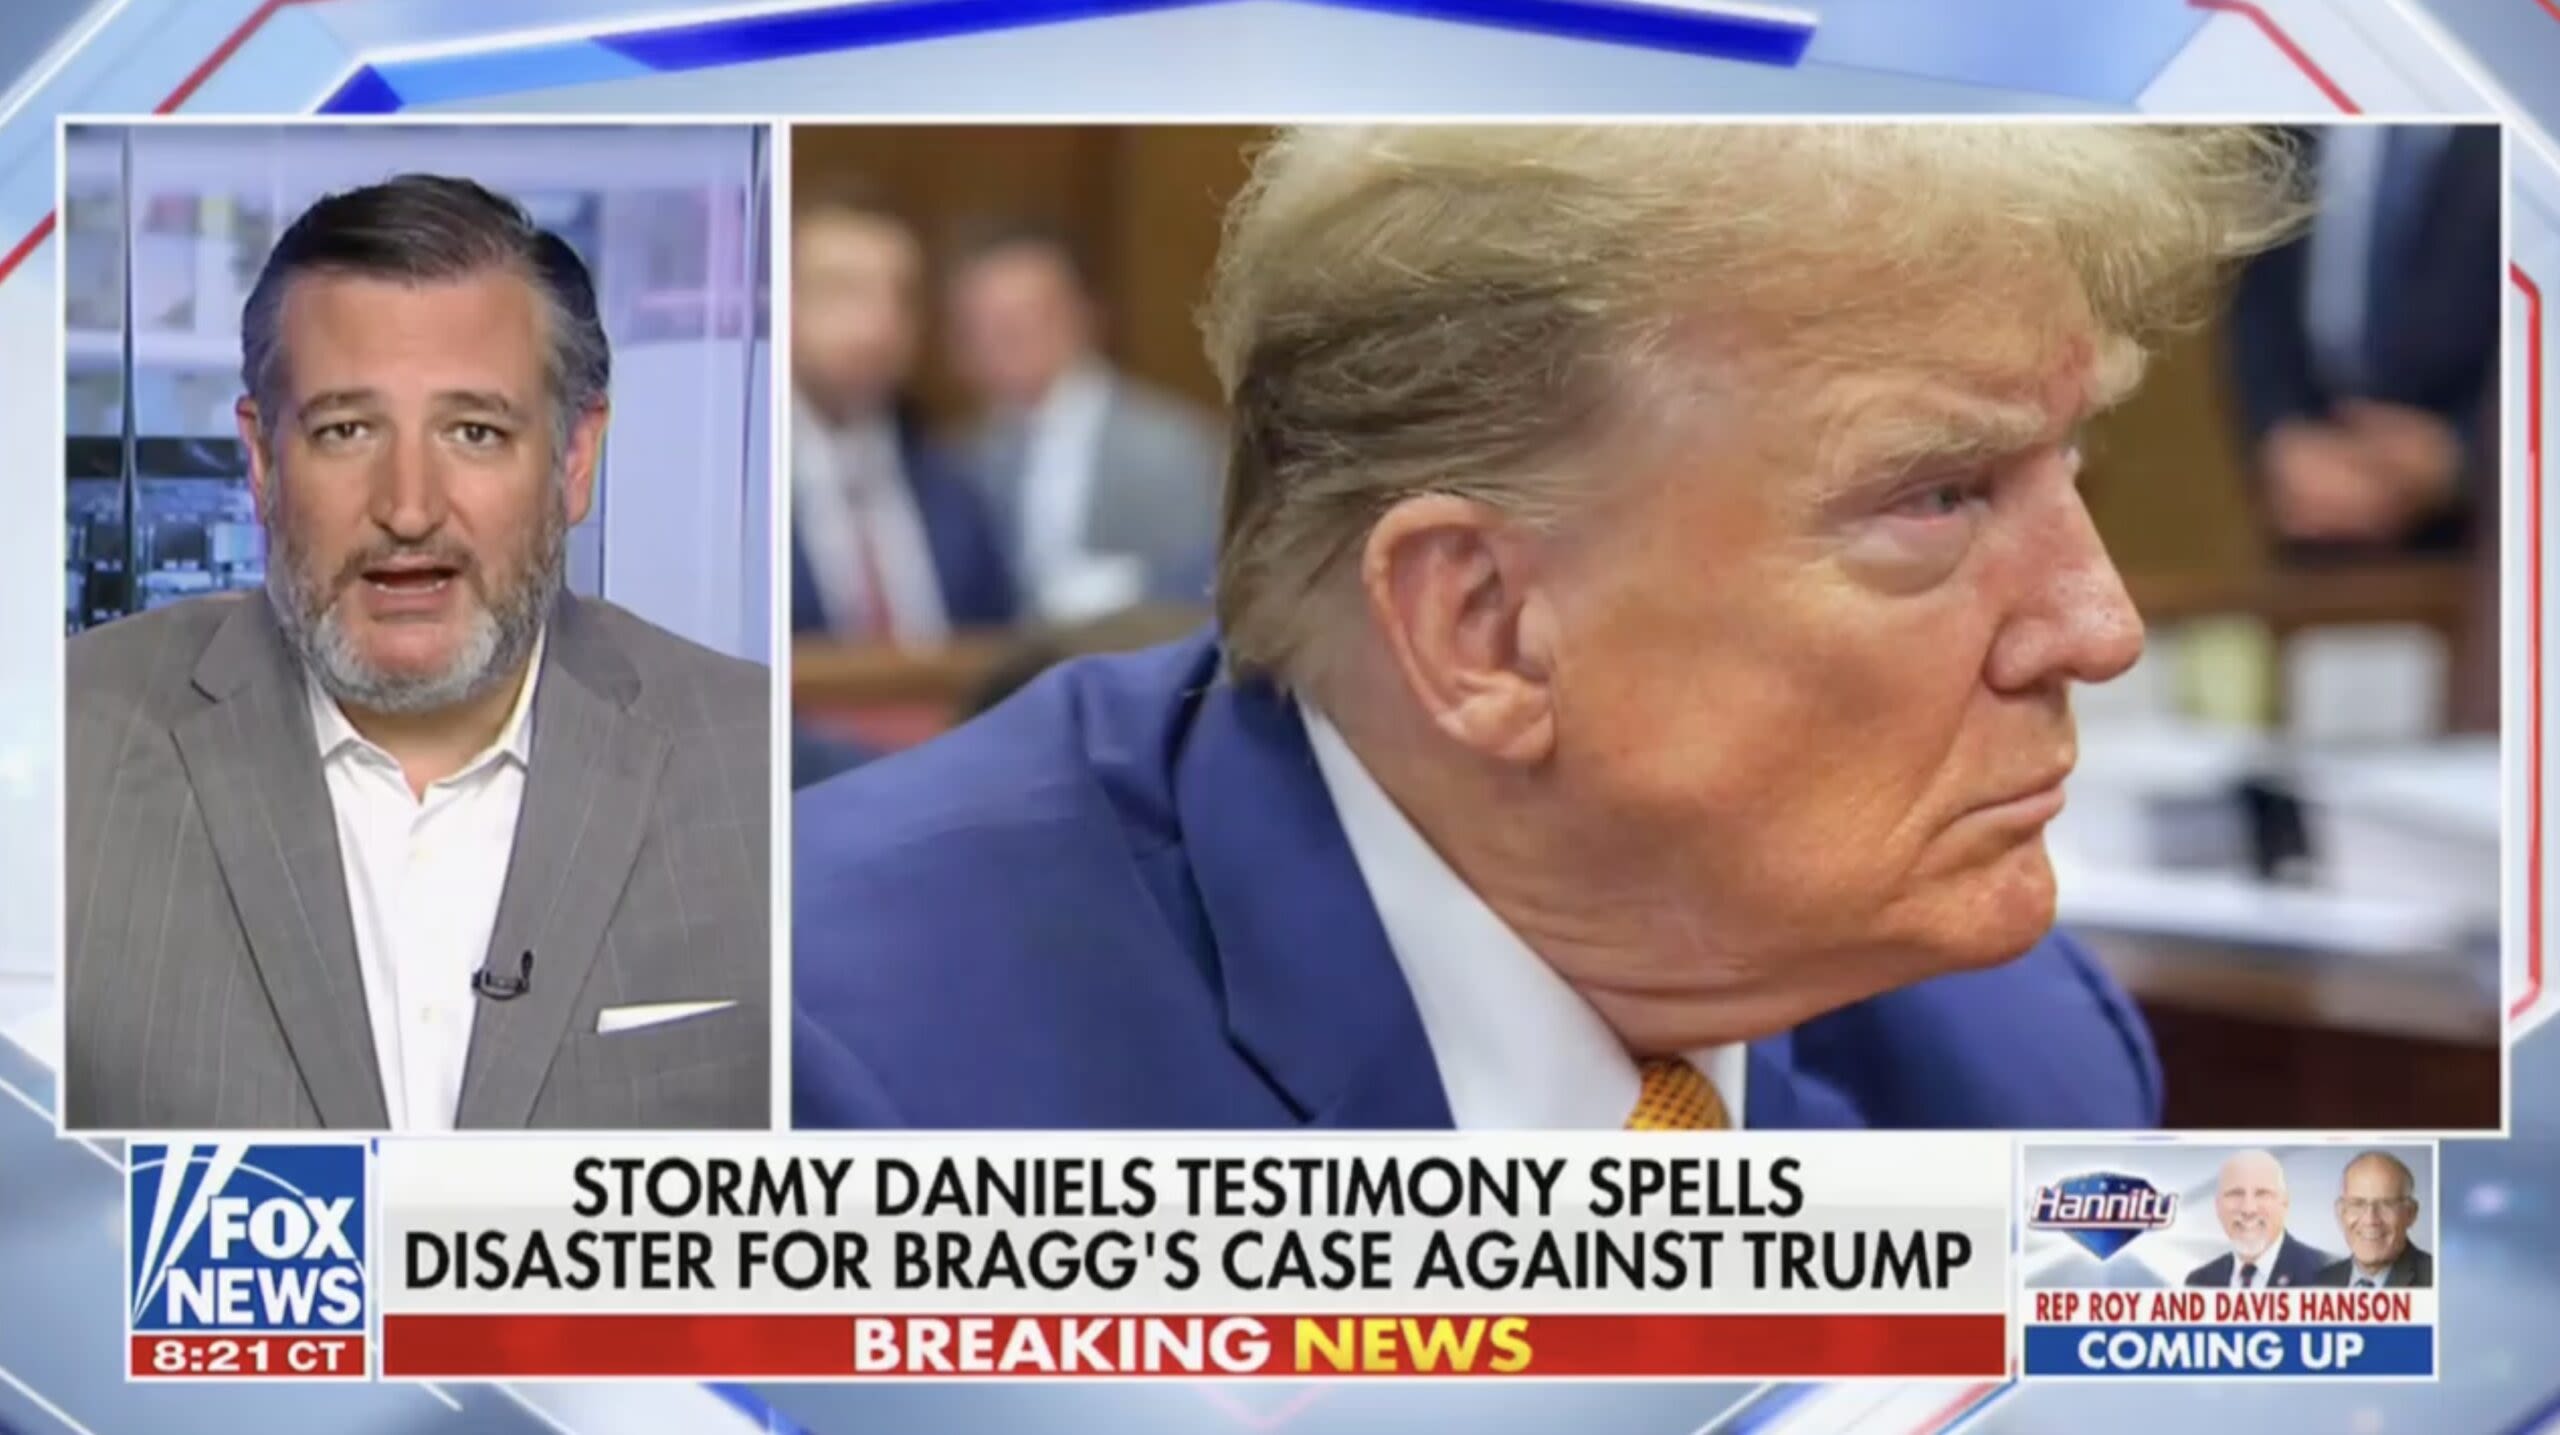 Ted Cruz Slams Stormy Daniels Testimony: ‘No Person on Planet Earth’ Believes Trump ‘Has Been Celibate All His Life’